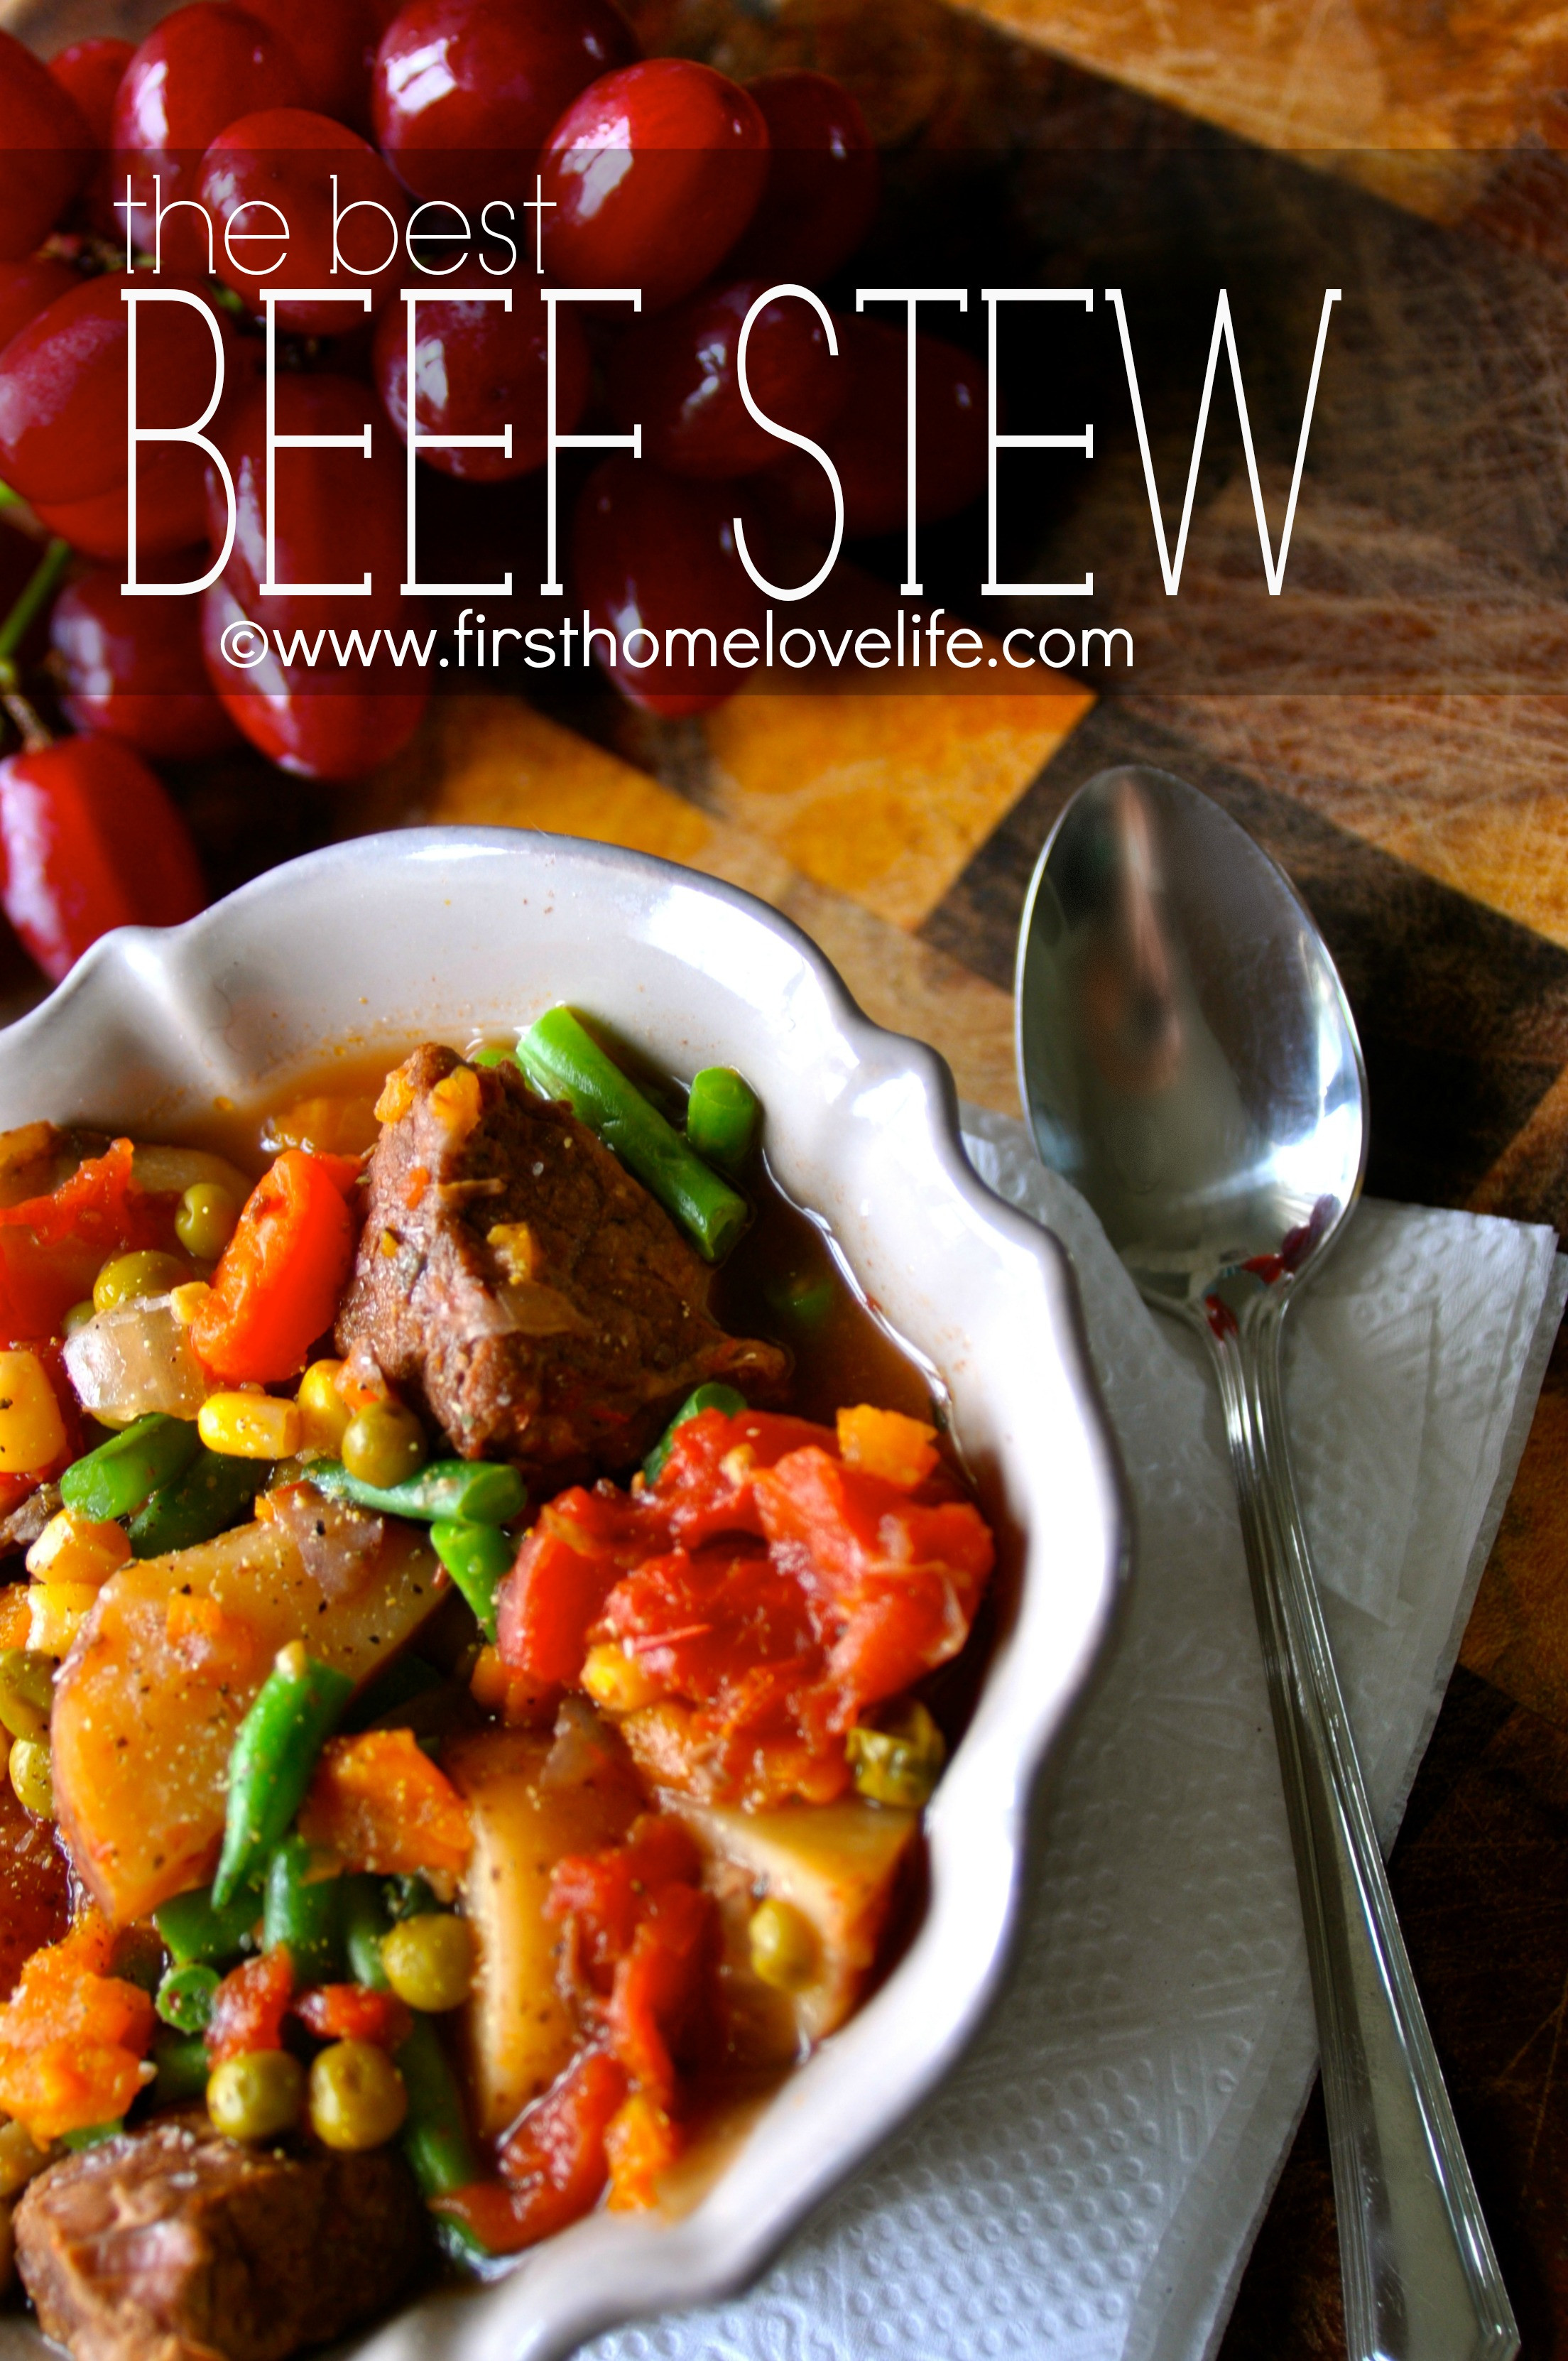 Best Meat For Beef Stew
 The Best Beef Stew Recipe First Home Love Life